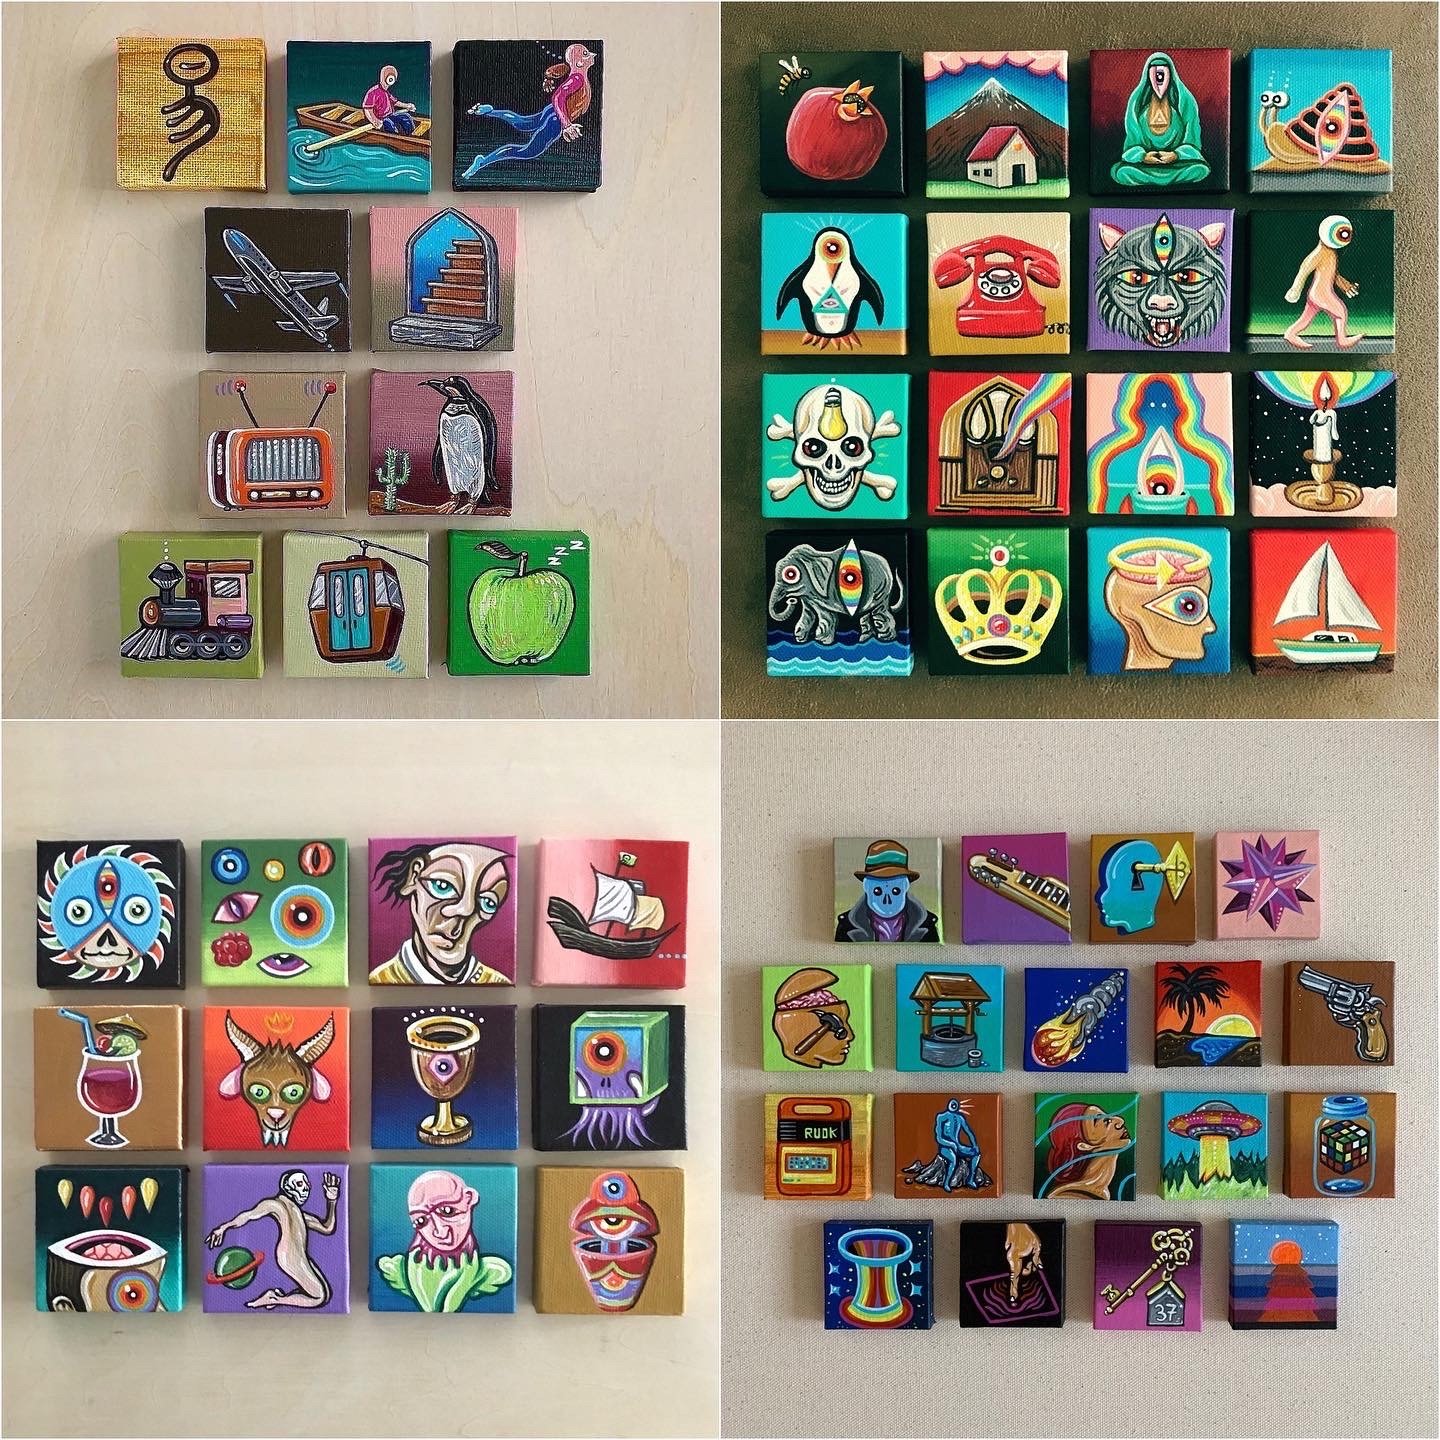 Image of Box set (dredg album collection of mini paintings) 